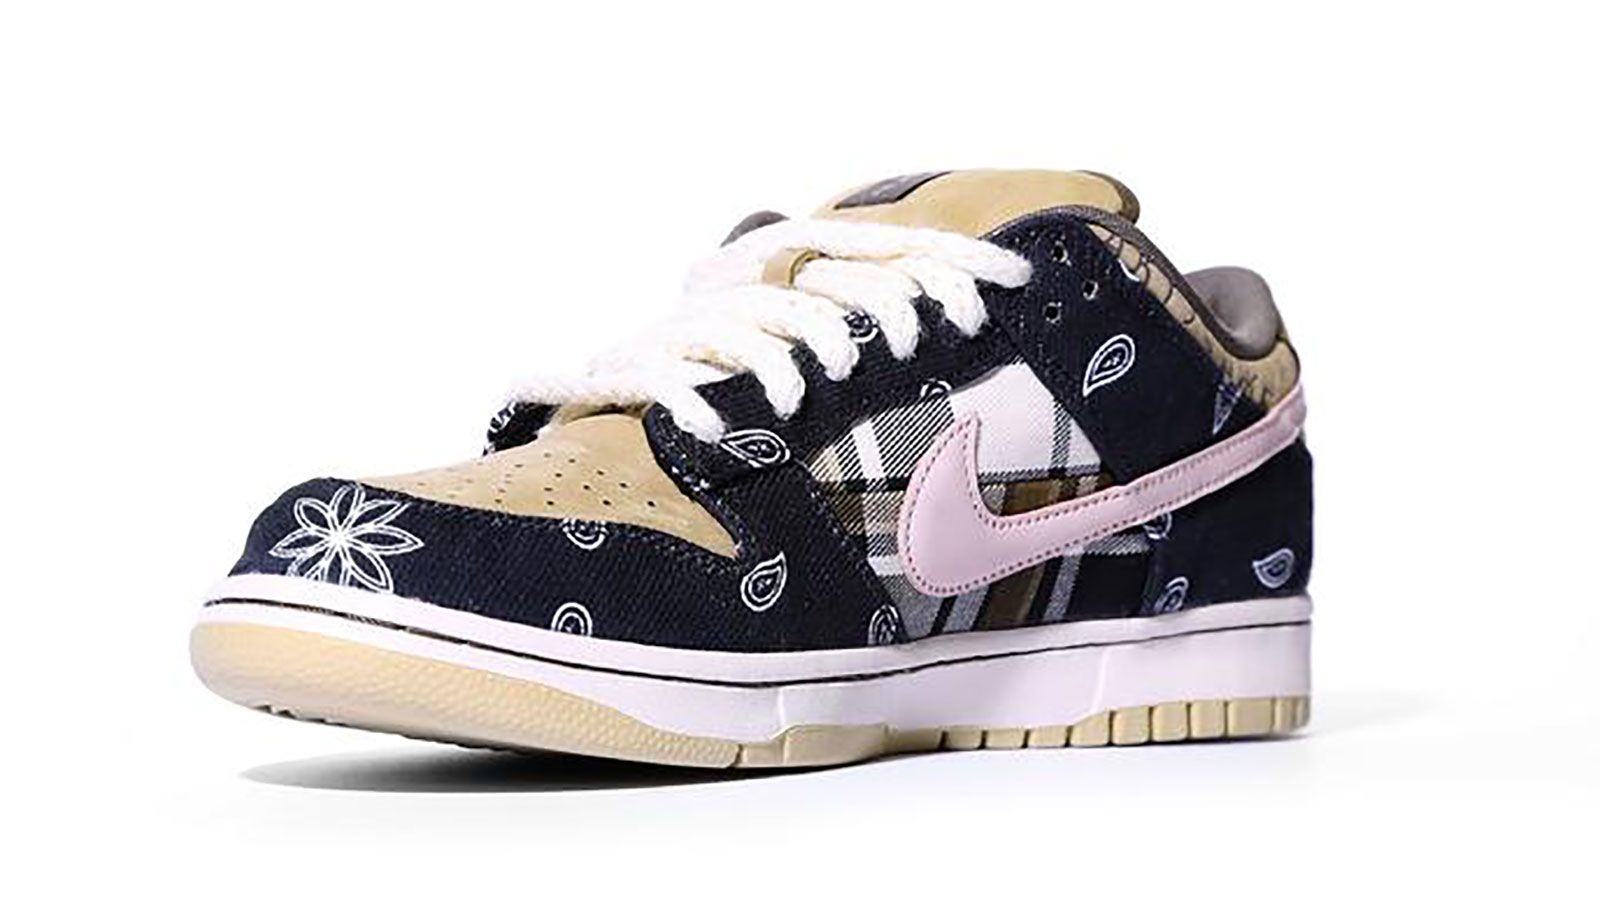 Travis upcoming nike sb dunks Scott just released his new Nike SB Dunk sneakers, and they